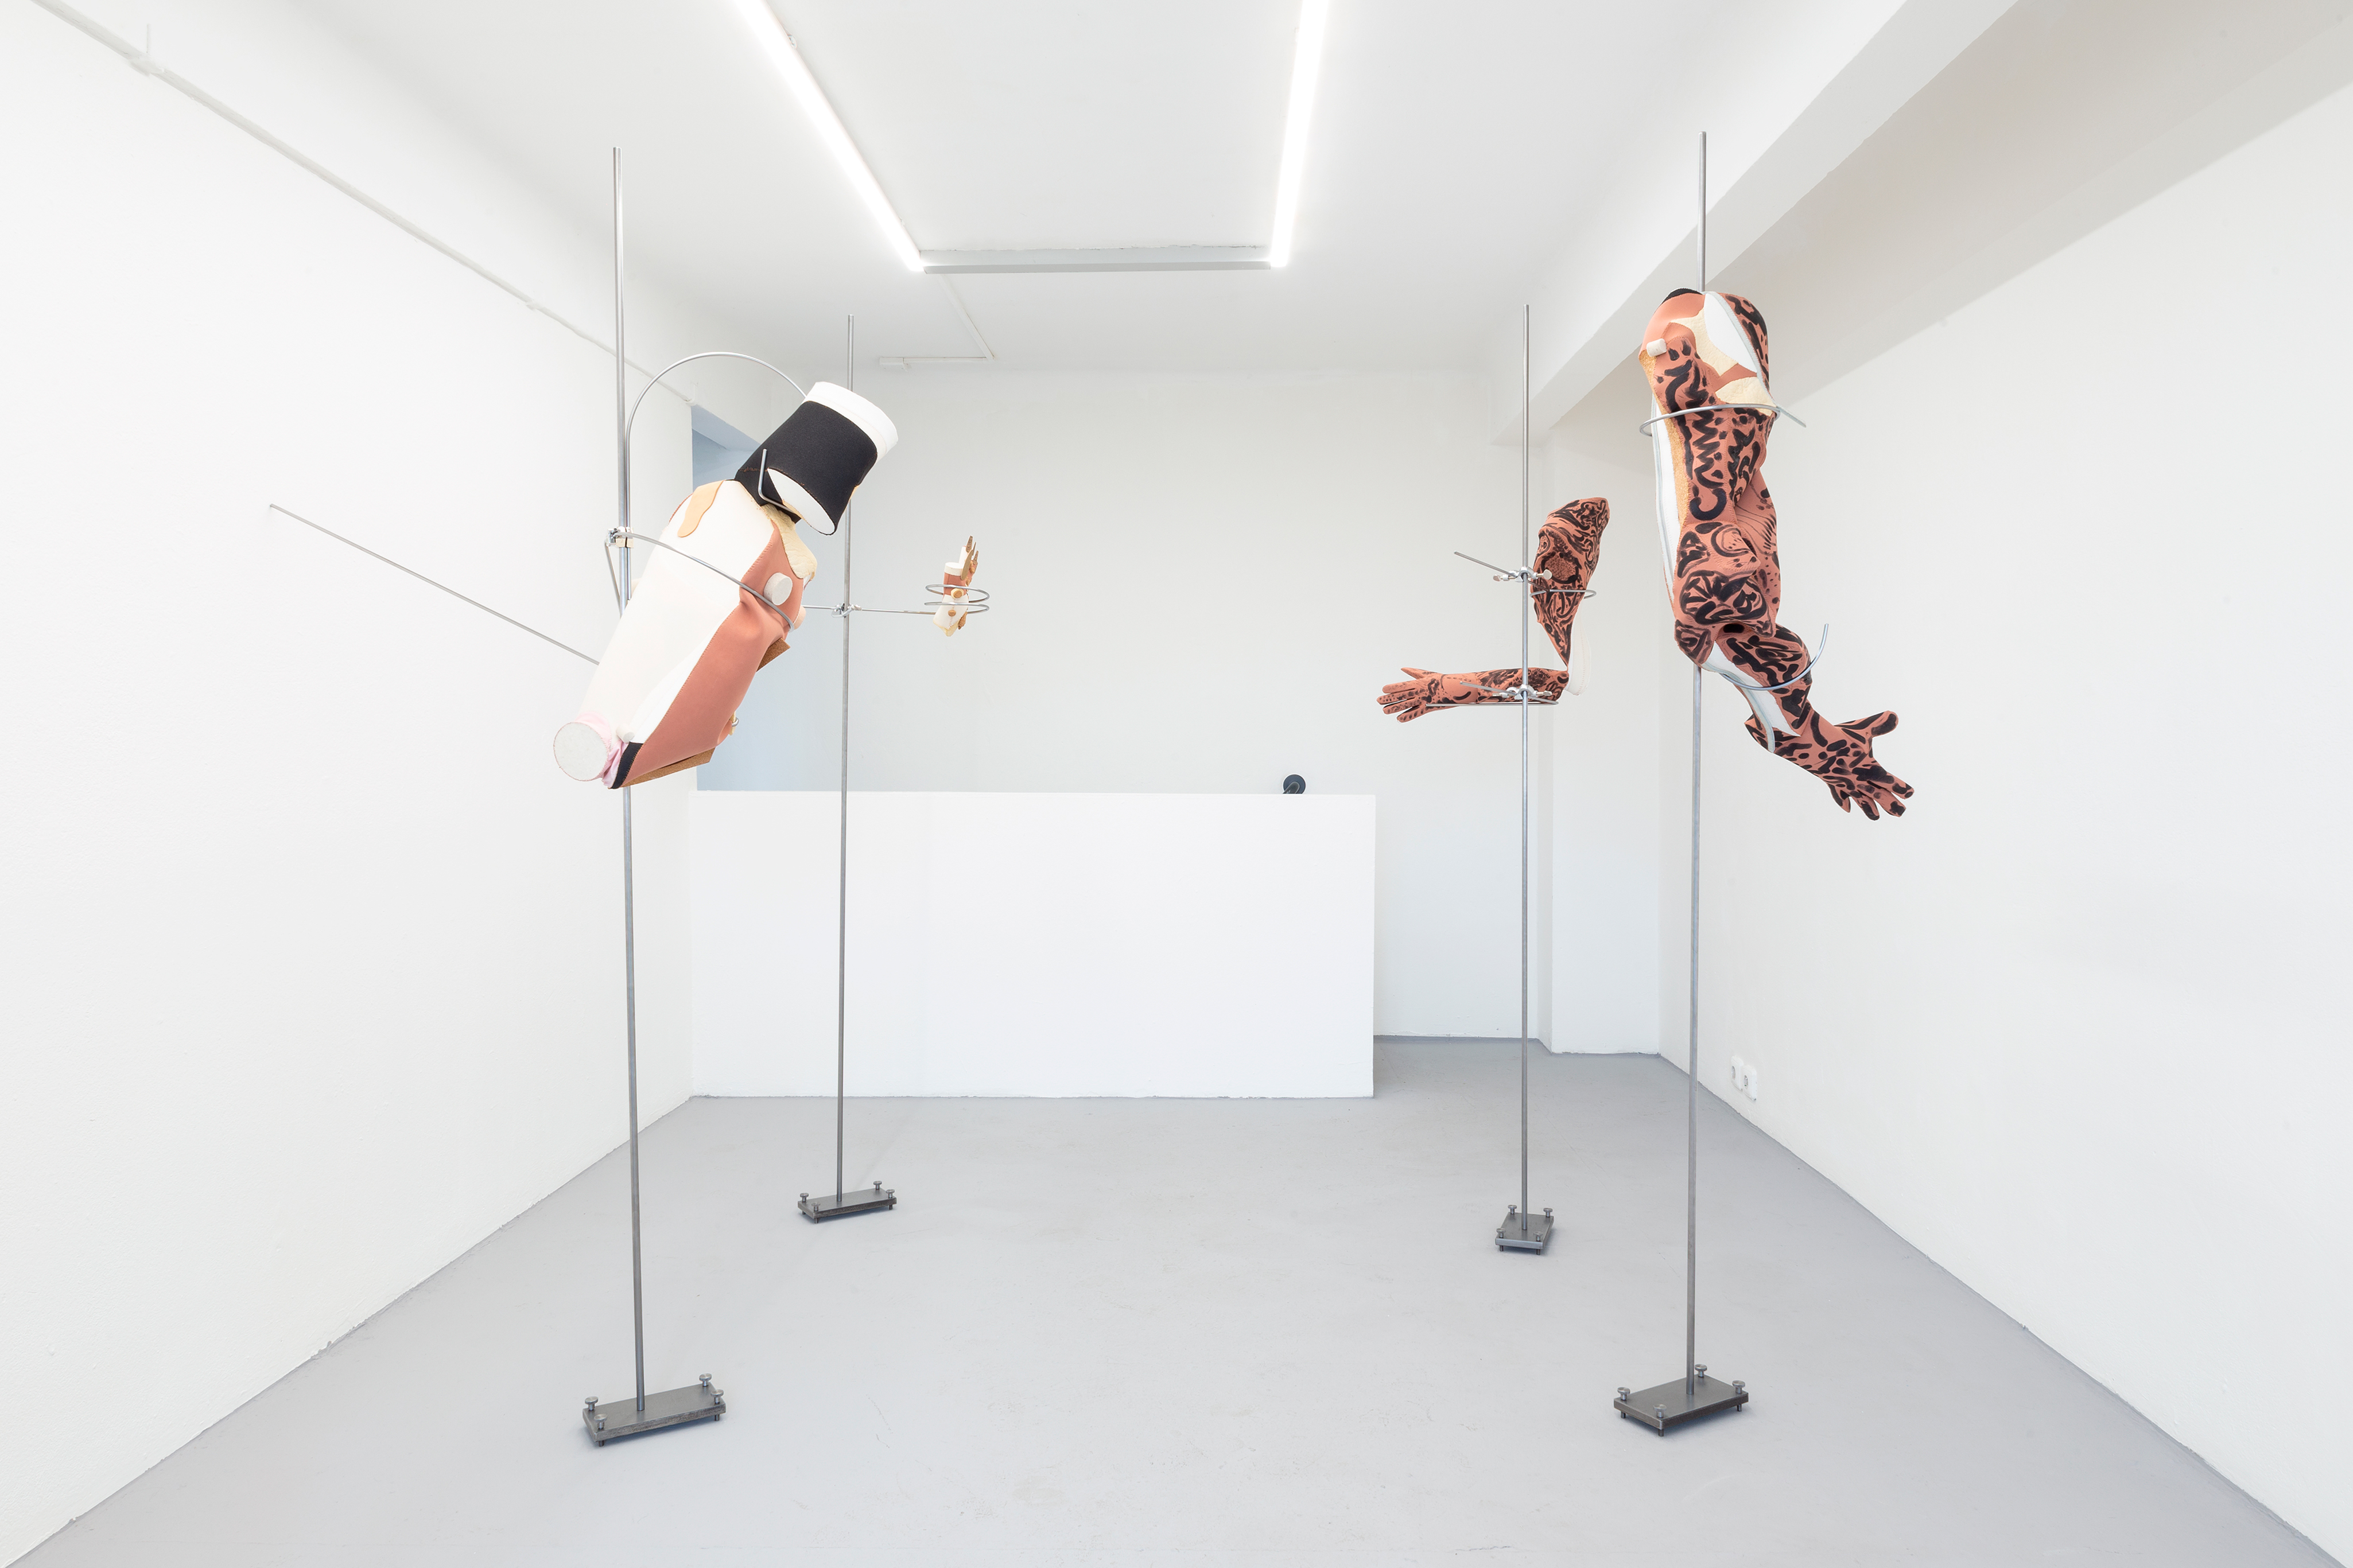 Photo of an art installation called Hands (and Other Products of Labor) by Klára Čermáková (Diploma Projects 2020, UMPRUM — Academy of Arts, Architecture & Design in Prague, Czechia) [view on first half]. Four sculptures (different parts of the human body), each hanging on a subtle metal construction.